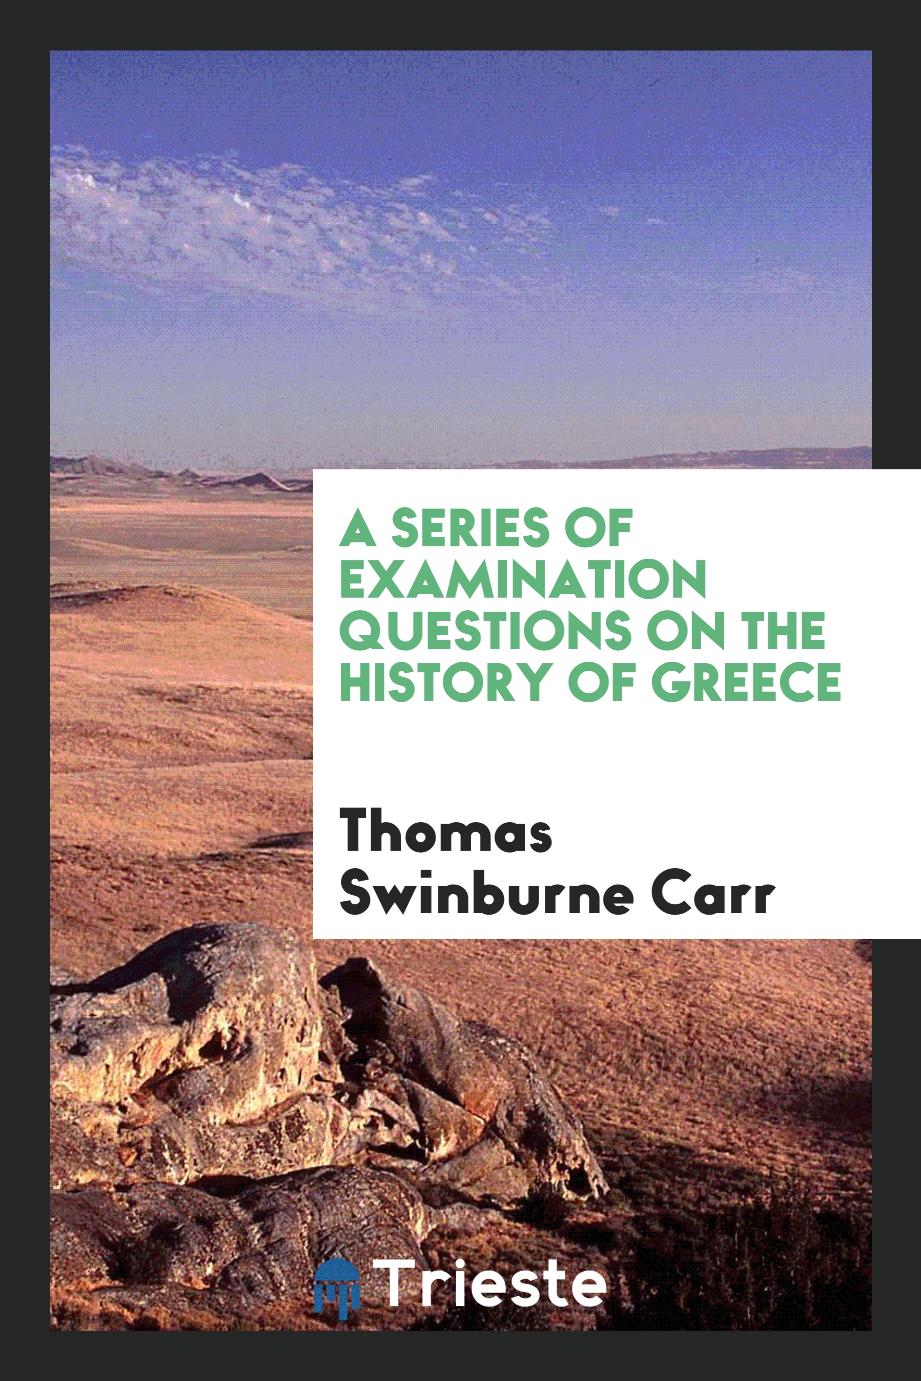 A series of examination questions on the history of Greece